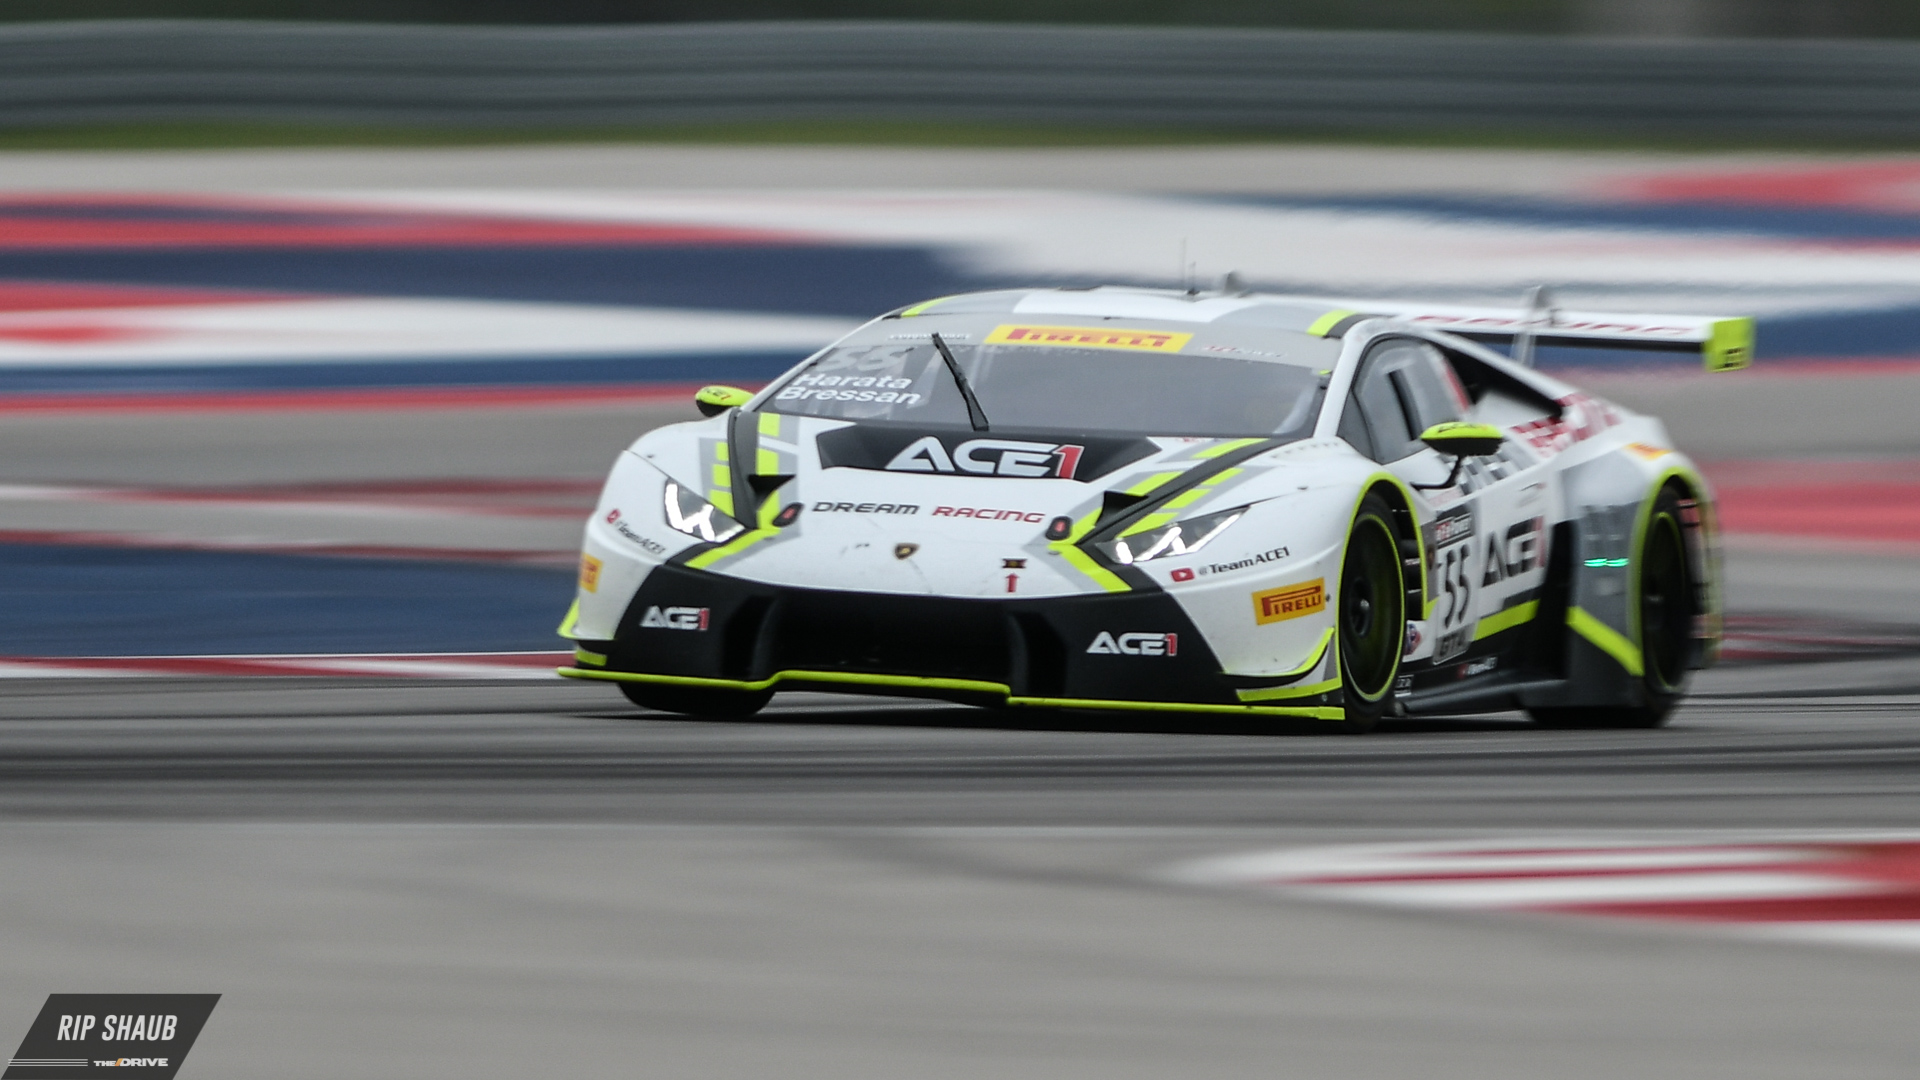 Dream Racing and Ace 1 brought their striking Lamborghini Huracan GT3 back to COTA with drivers Yuki Harata and Alessandro Bressan., <i>© Rip Shaub - All Rights Reserved</i>